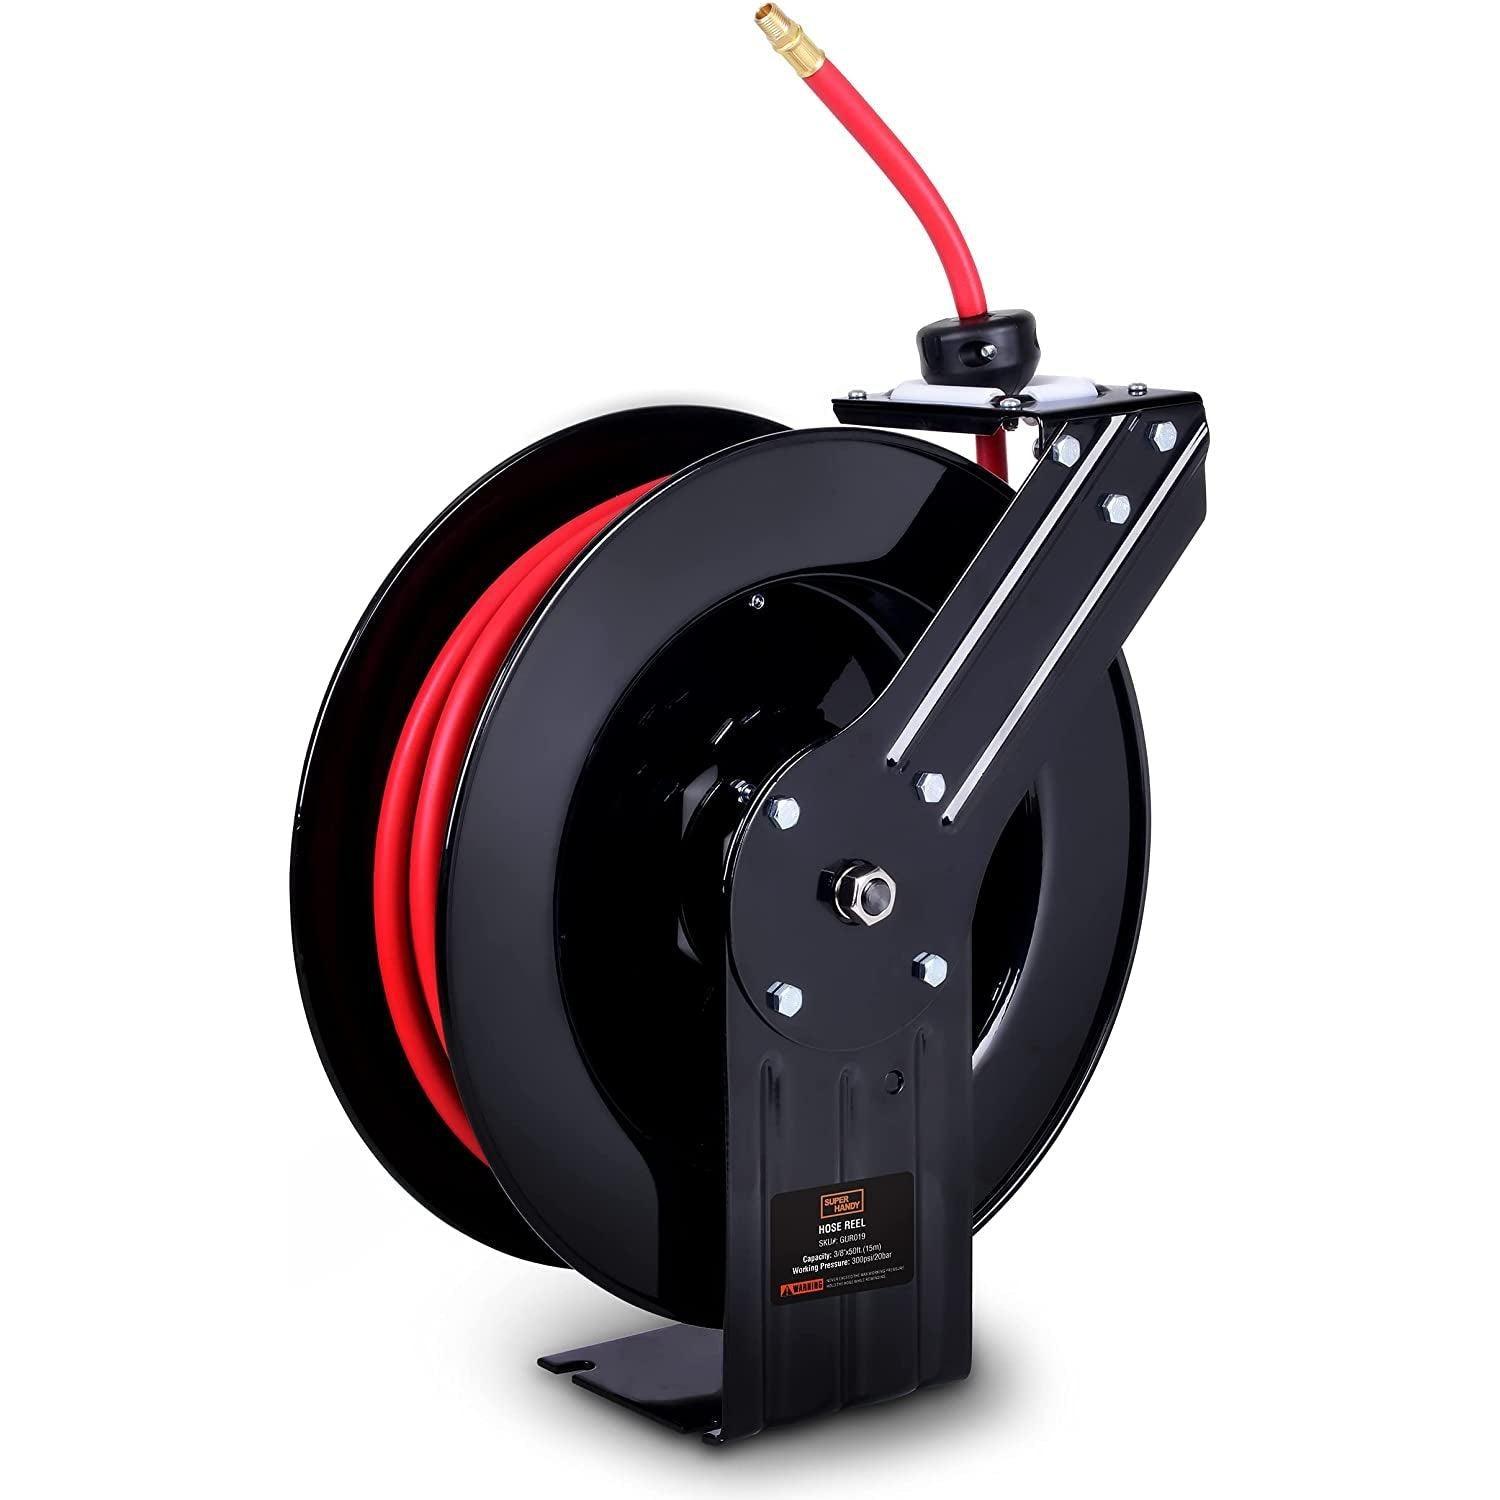 SuperHandy Industrial Retractable Air Hose Reel - 3/8" x  50'FT, 1/4" NPT Connections, Single Arm - DIY Tools by GreatCircleUS